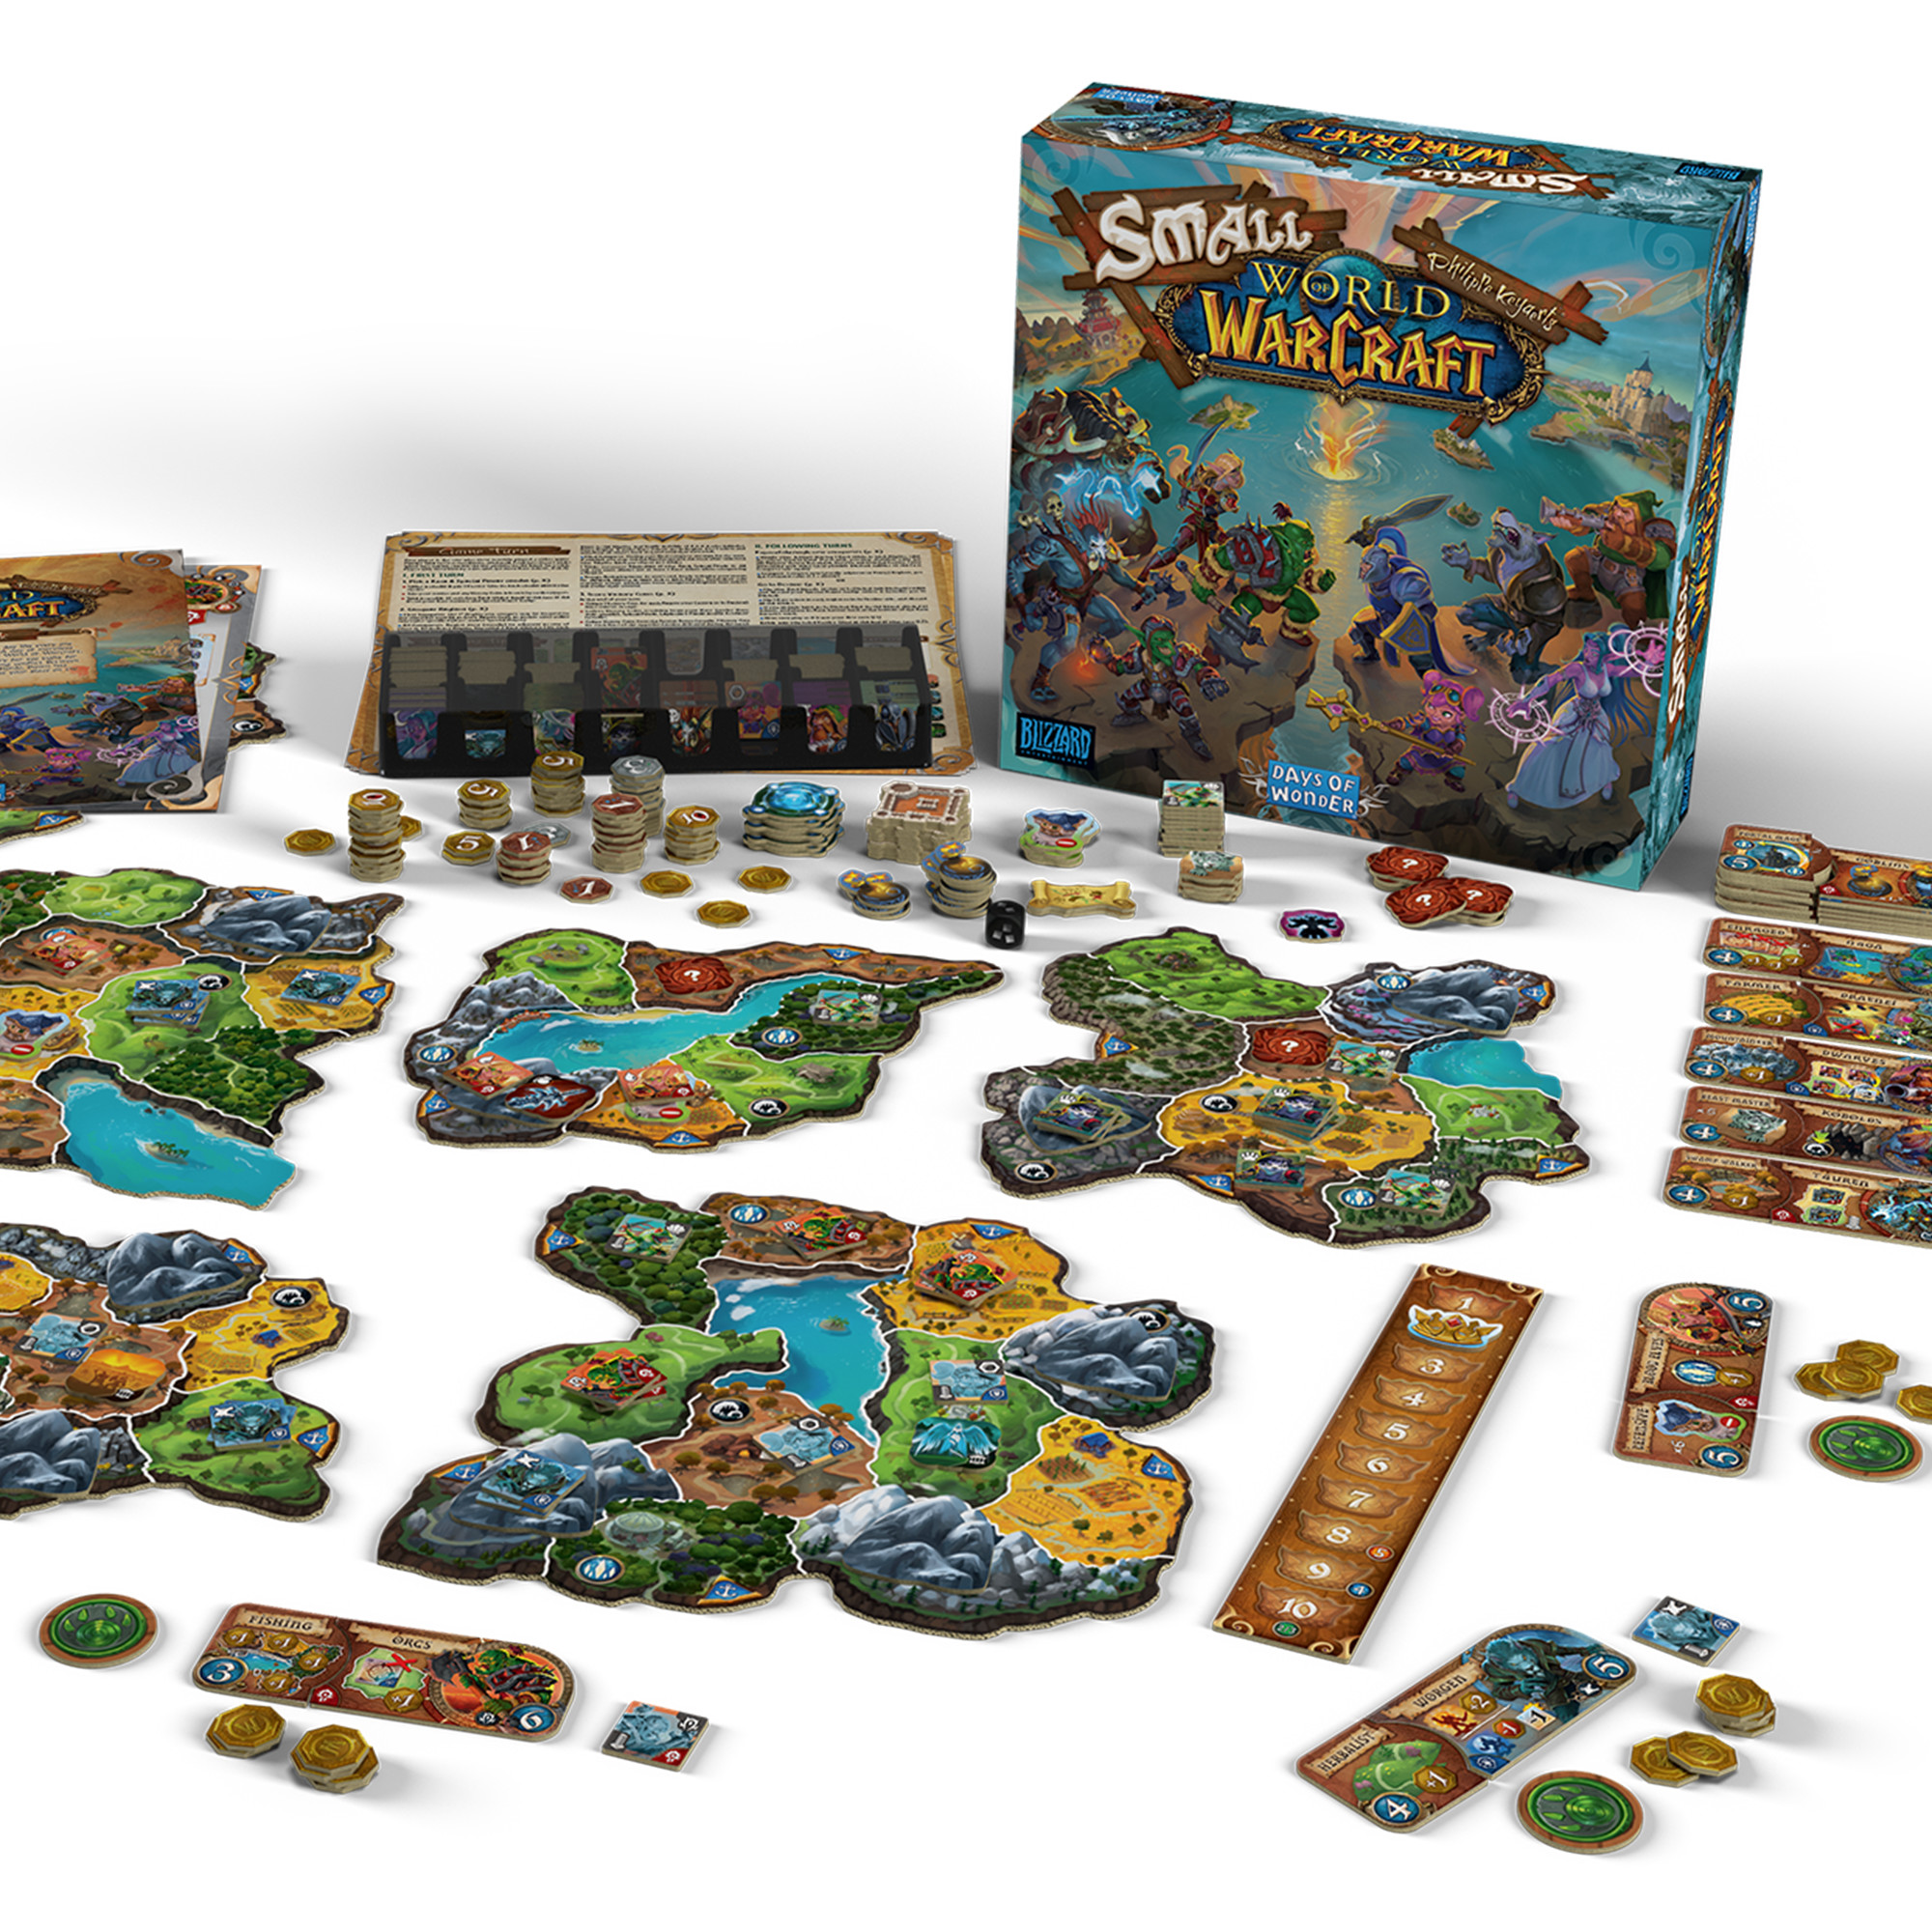 Small World of Warcraft Strategy Board Game - image 3 of 6